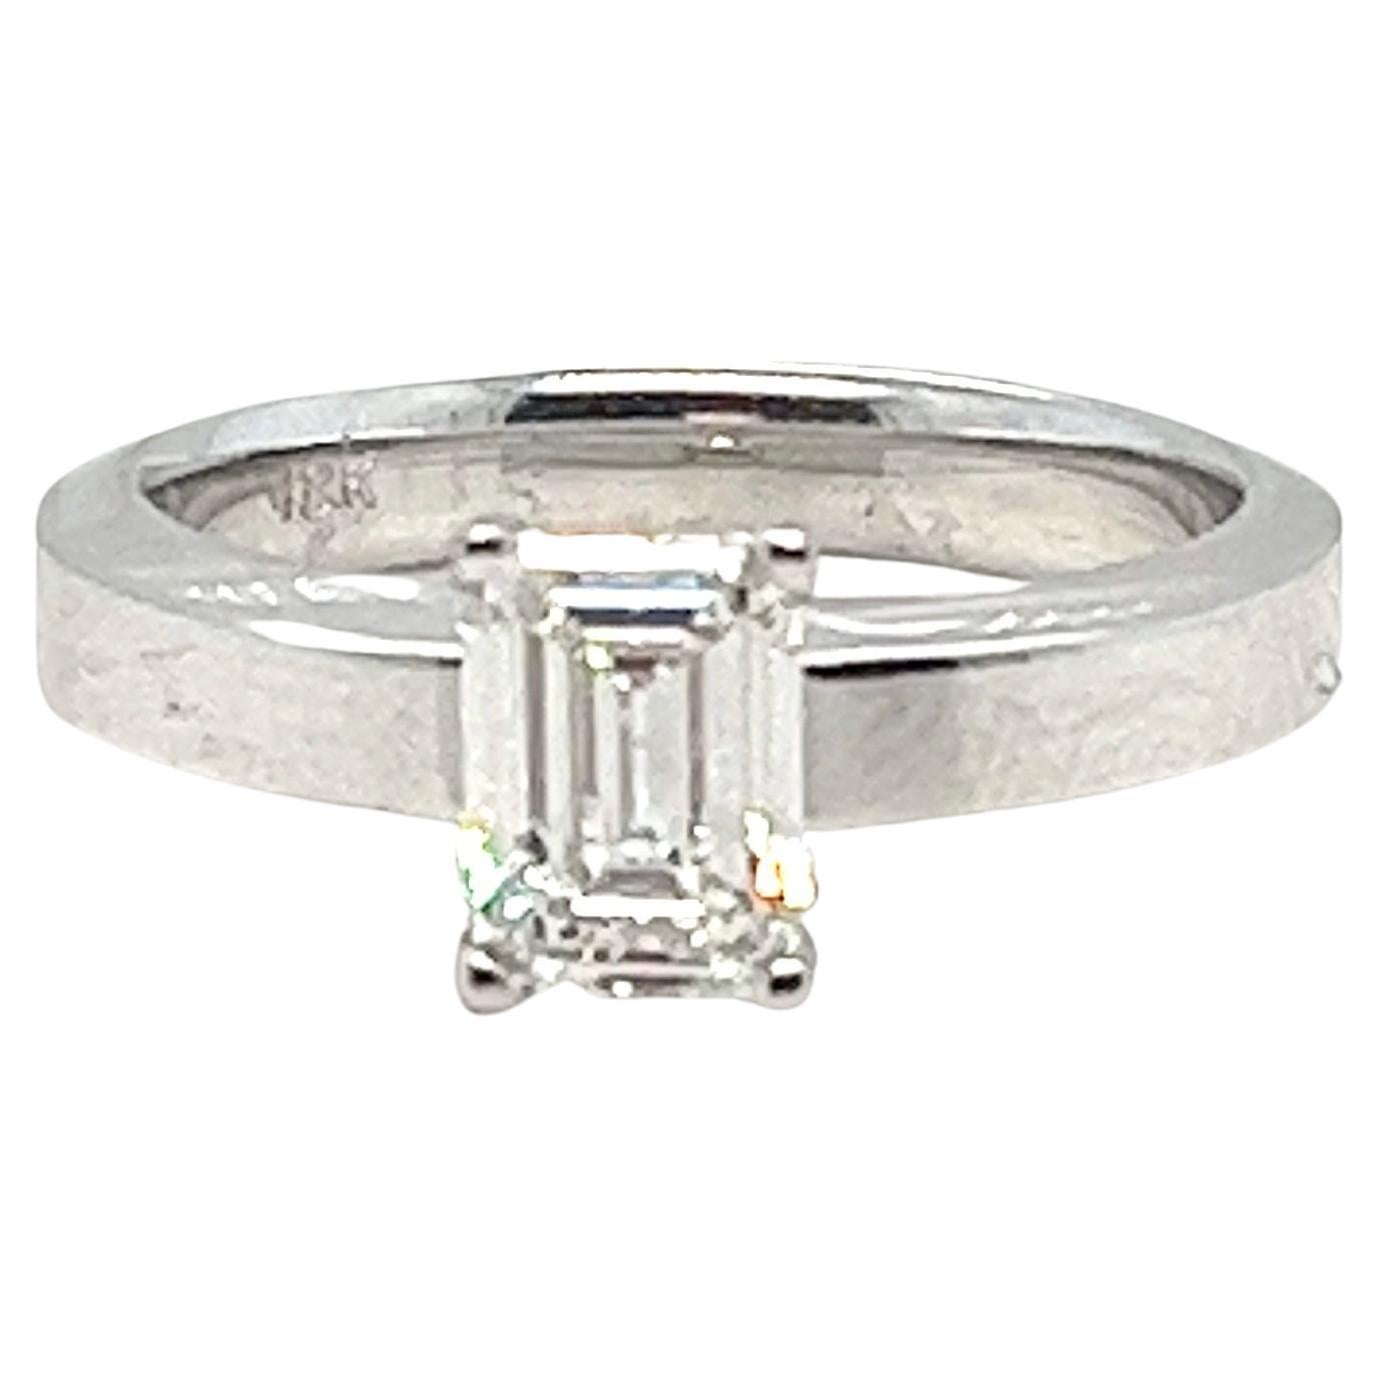 Exquisite 1.10 Carat Emerald Cut Diamond Solitaire Ring - GIA Certified

Elevate your commitment with a diamond that captures the essence of enduring love and exquisite elegance. This GIA certified natural earth mined emerald cut diamond, weighing